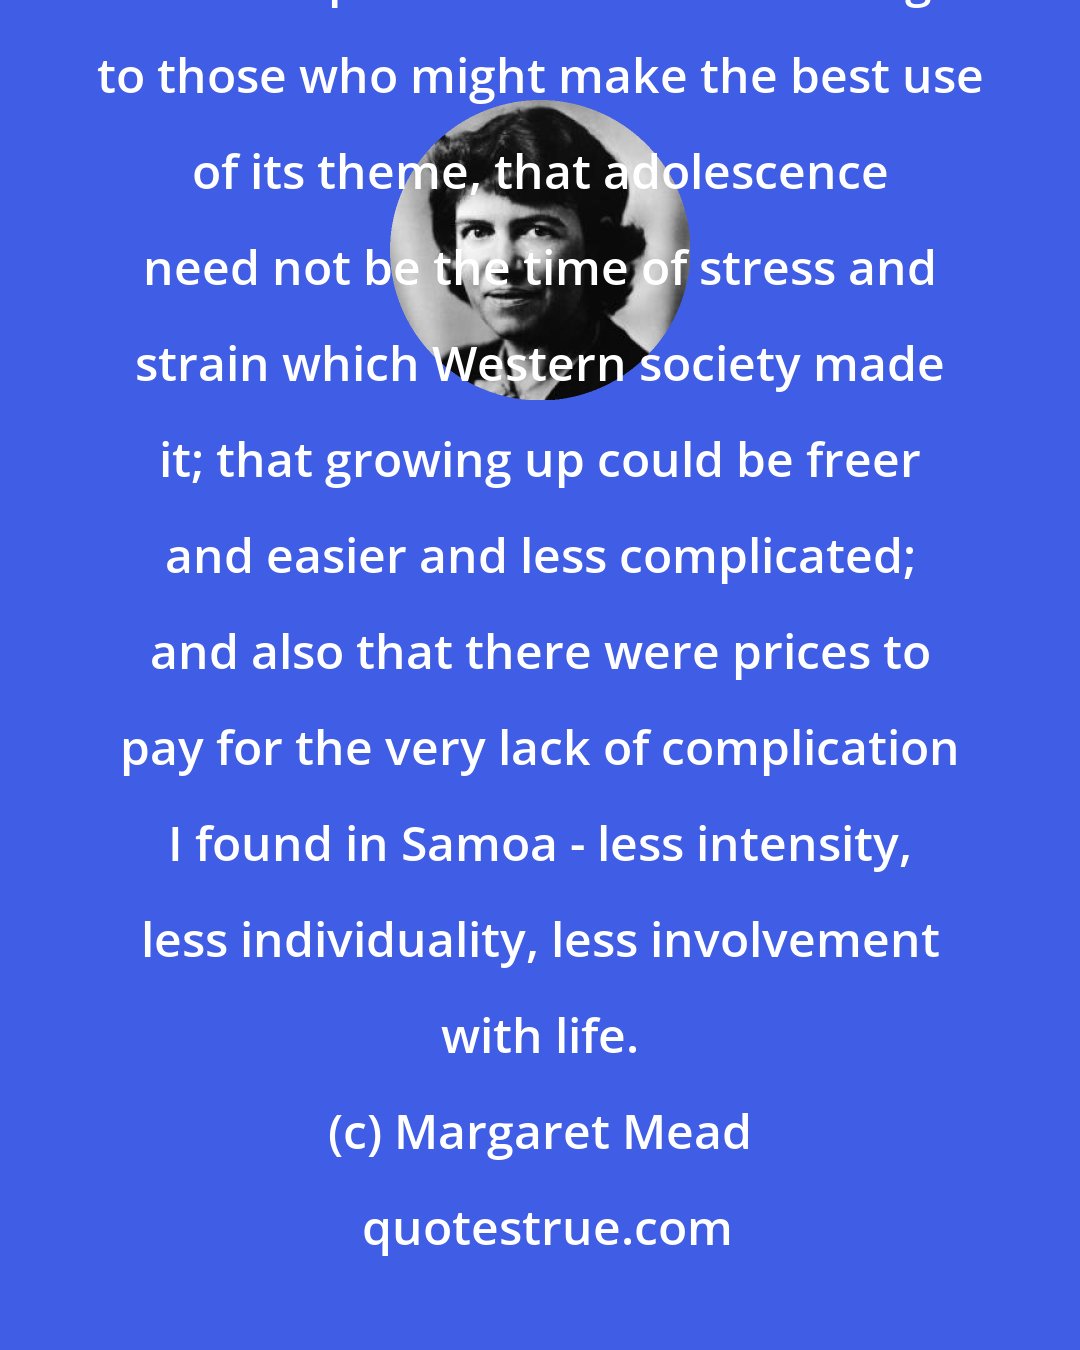 Margaret Mead: I did not write it [Coming of Age in Samoa] as a popular book, but only with the hope that it would be intelligible to those who might make the best use of its theme, that adolescence need not be the time of stress and strain which Western society made it; that growing up could be freer and easier and less complicated; and also that there were prices to pay for the very lack of complication I found in Samoa - less intensity, less individuality, less involvement with life.